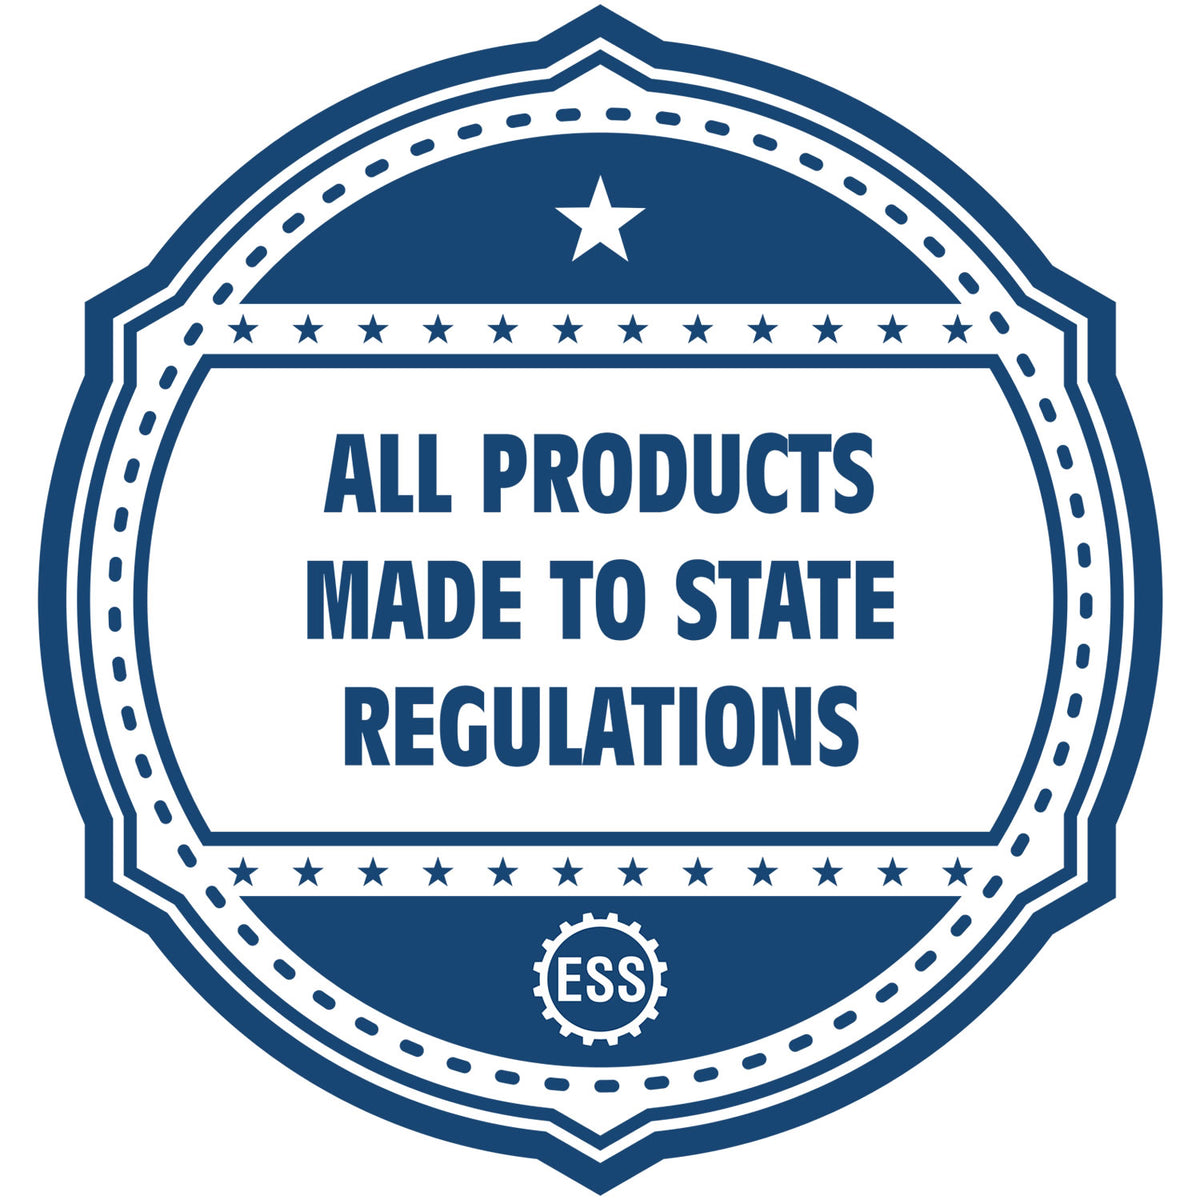 A blue icon or badge for the Slim Pre-Inked Virginia Professional Geologist Seal Stamp showing that this product is made in compliance with state regulations.